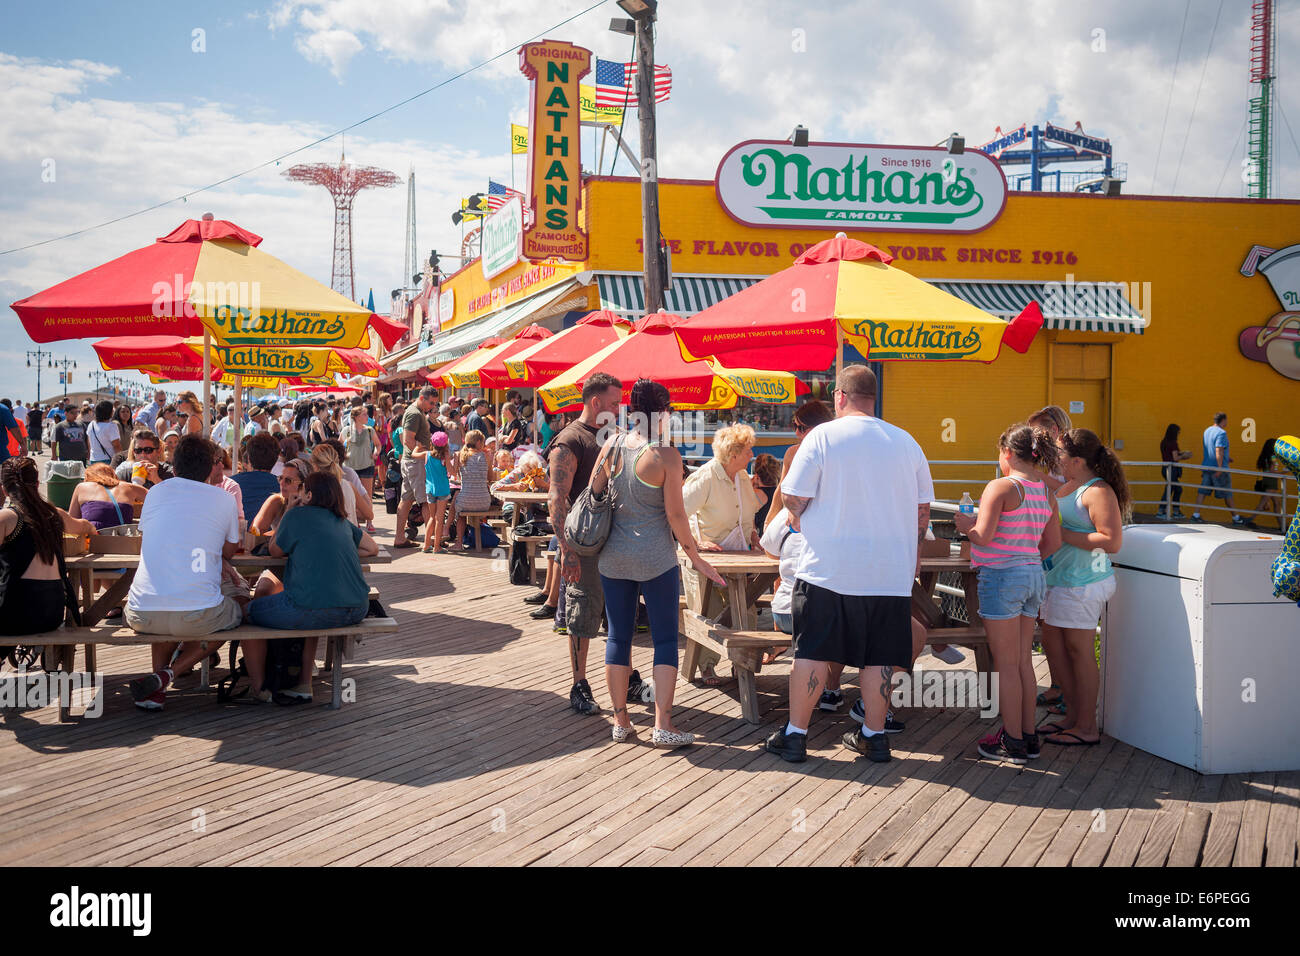 Visitors to Coney Island in New York on Sunday, August 24, 2014 stop at the Nathan's Famous restaurant branch on the boardwalk. Stock Photo